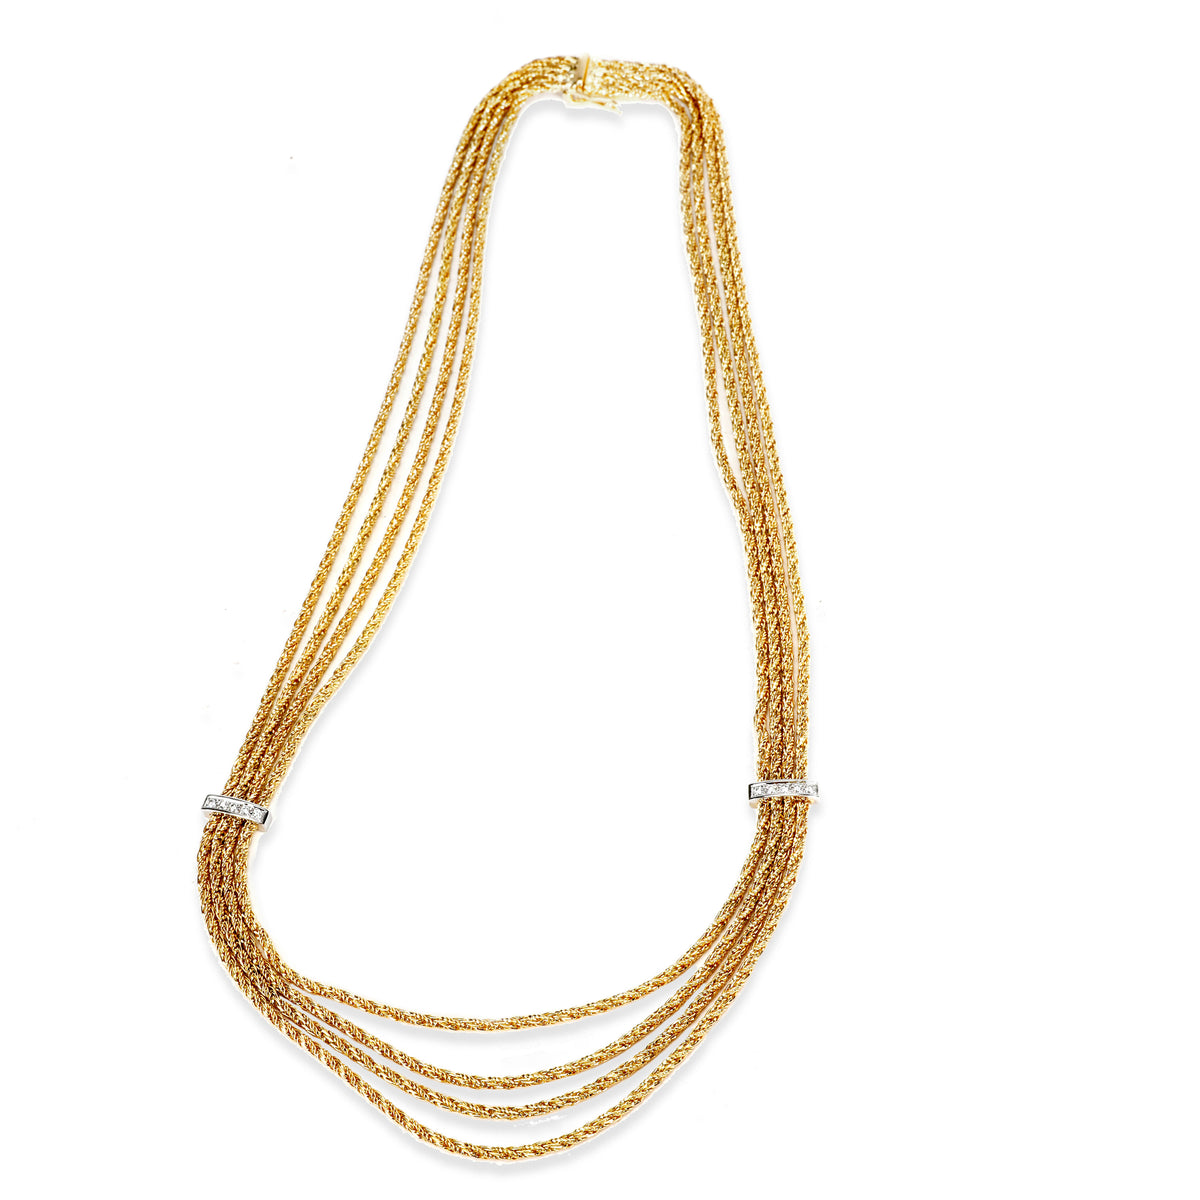 Vintage Tiffany & Co. Draperie Diamond Necklace in 18K Yellow Gold 0.10 CTW